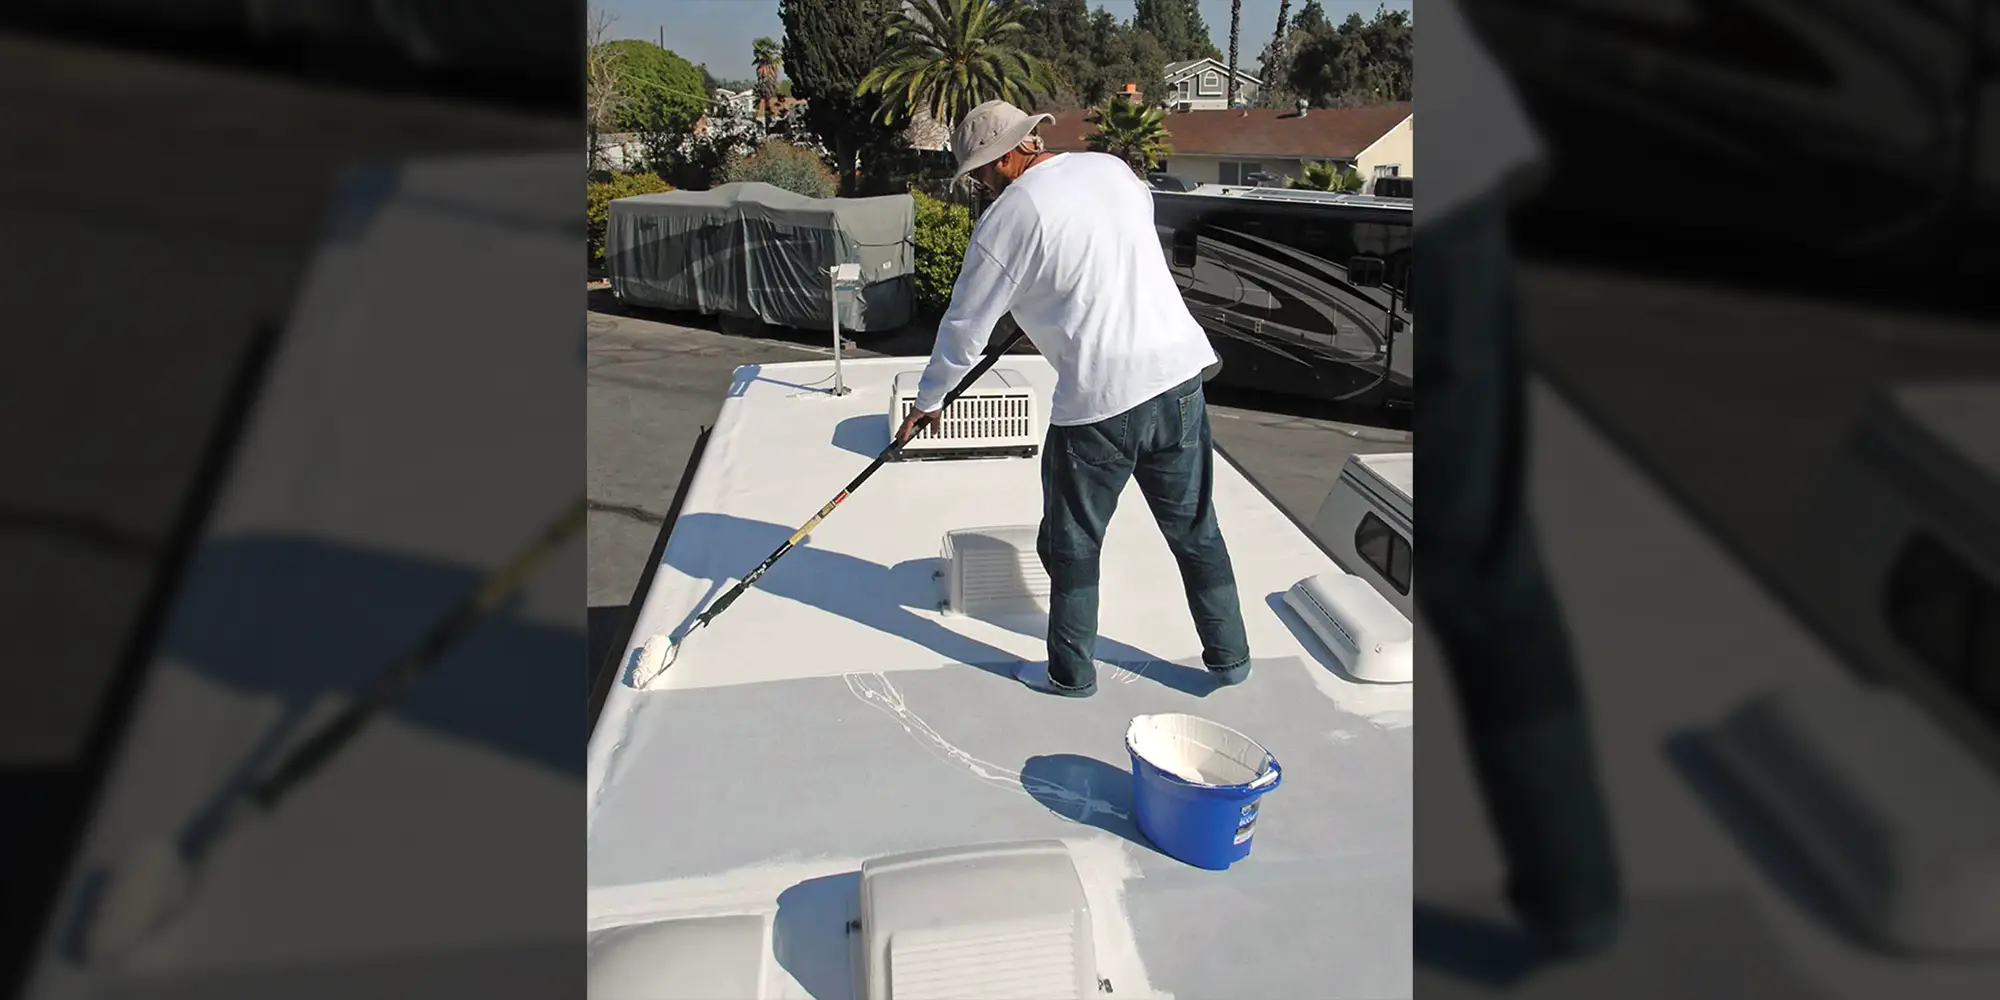 a man atop an RV, using a paint roller to apply a coat of a rubber sealant